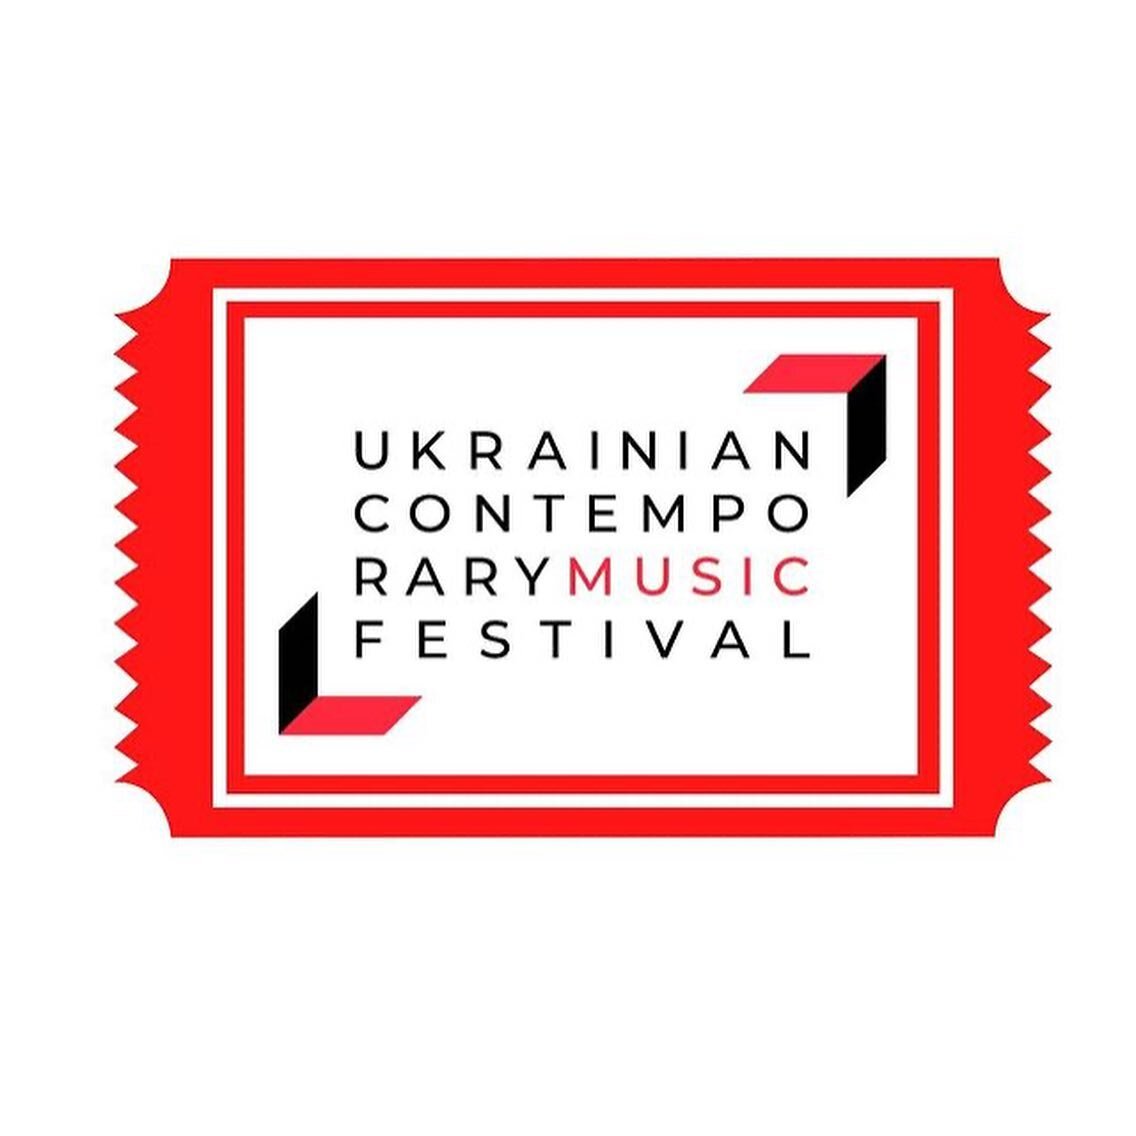 Wonder what contemporary composers from Ukraine have been up to? Find out March 5 - 7 from the comfort of your @ikea couch!

3 artists from &AElig;ON will be joining a brilliant roster of musicians and musicologists for the second EVER Ukrainian Cont